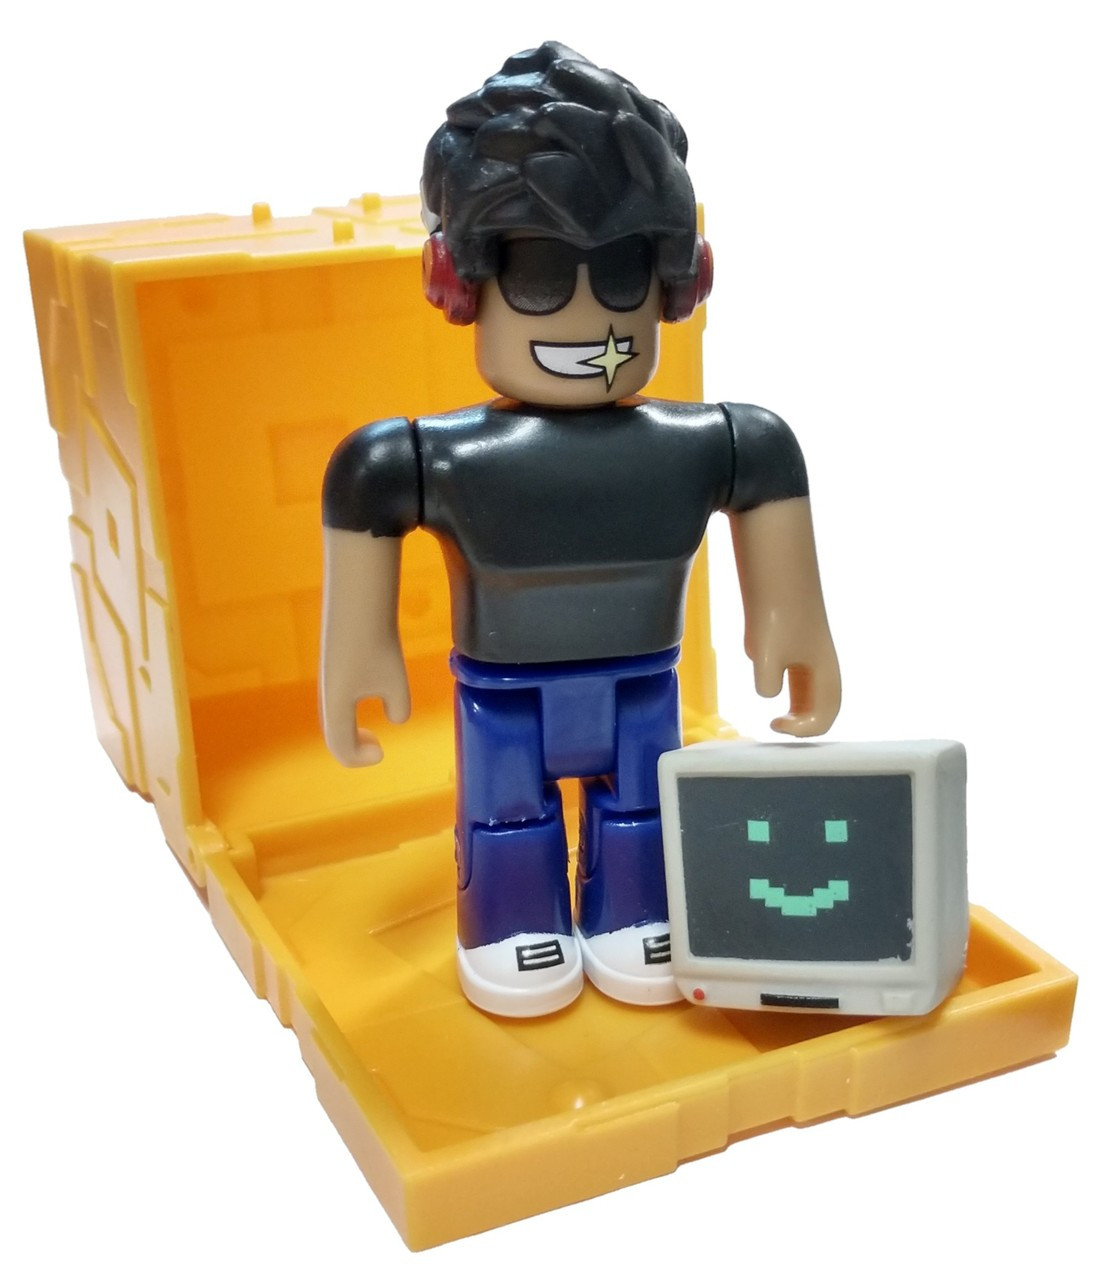 Roblox Series 5 Simbuilder 3 Mini Figure With Gold Cube And Online Code Loose Jazwares Toywiz - sonic s torso roblox